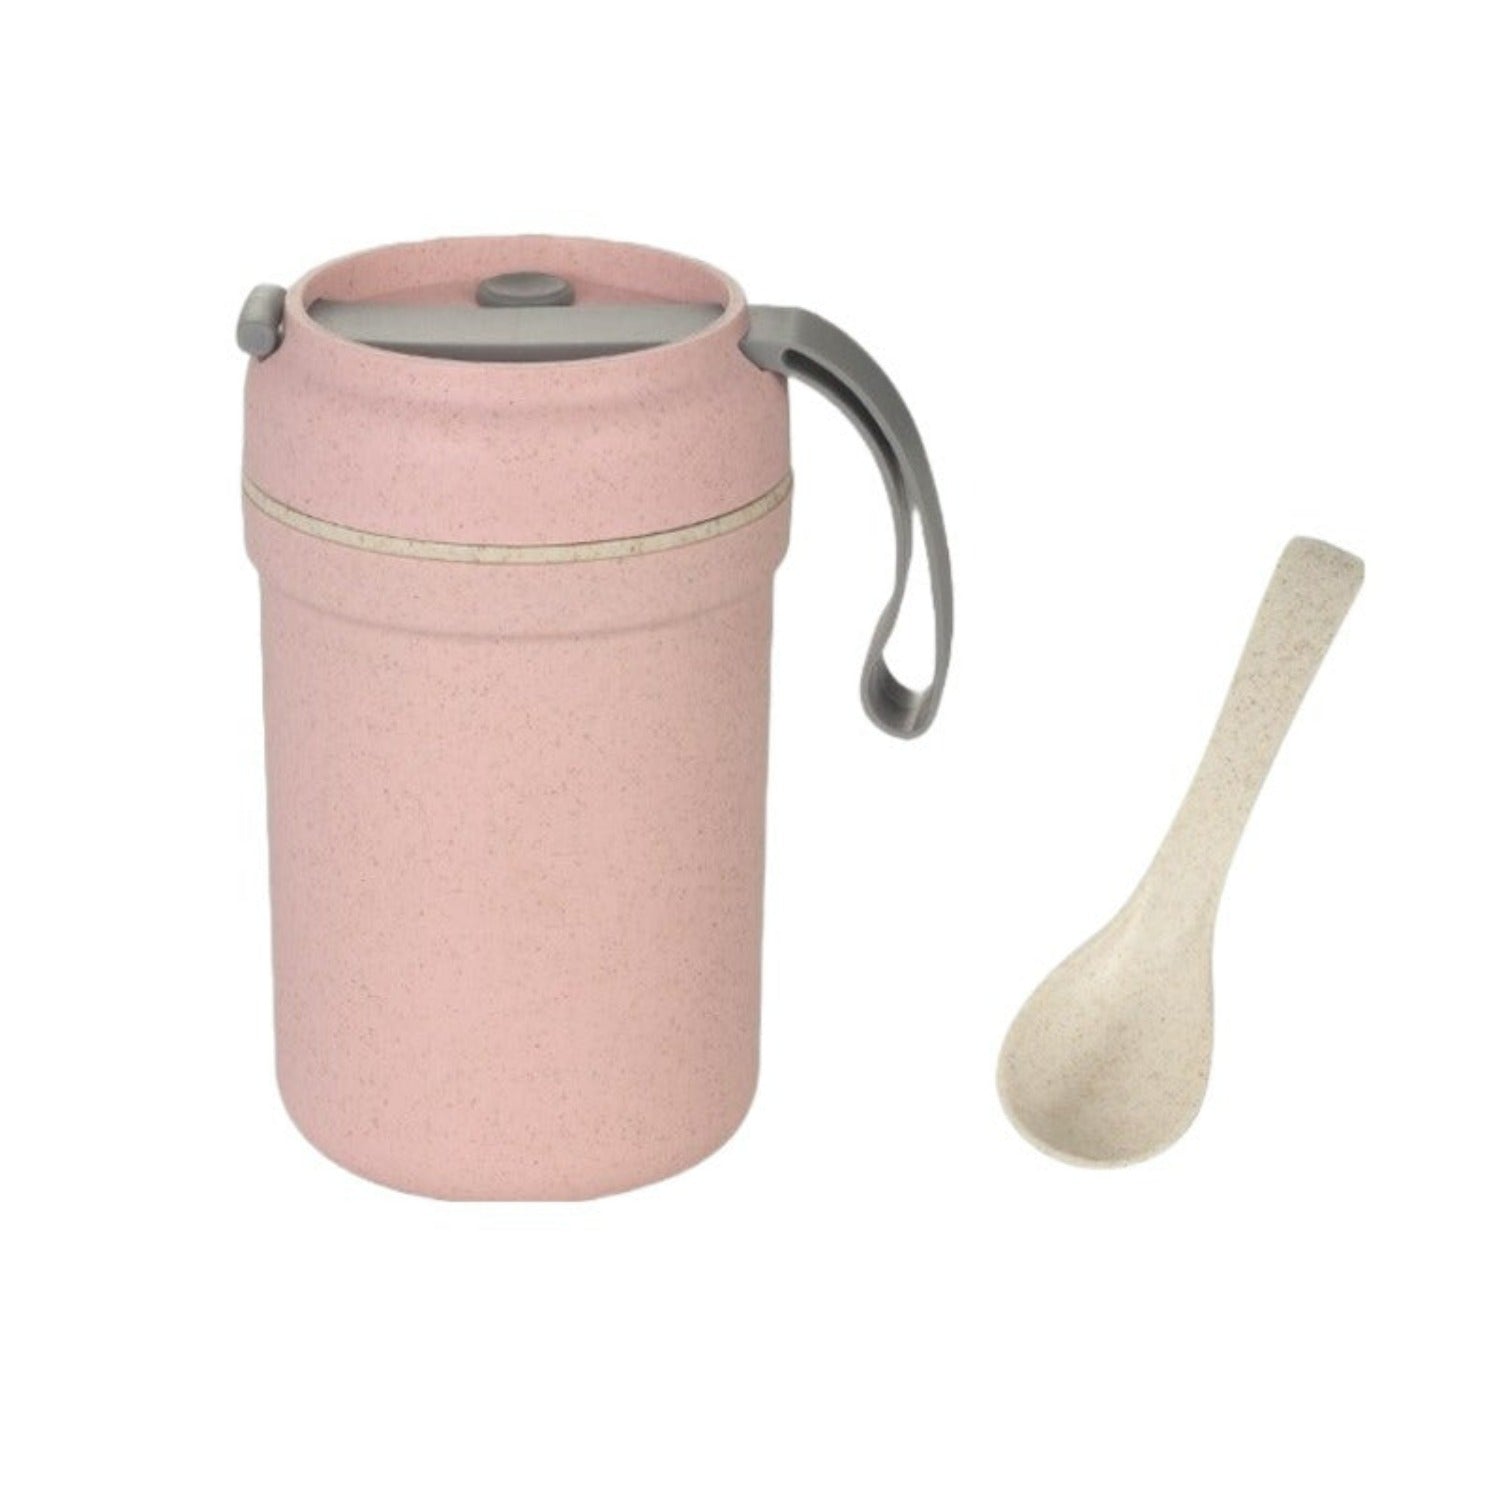 Wheat Straw Microwavable Lunch Box Thermos 300ml Pink